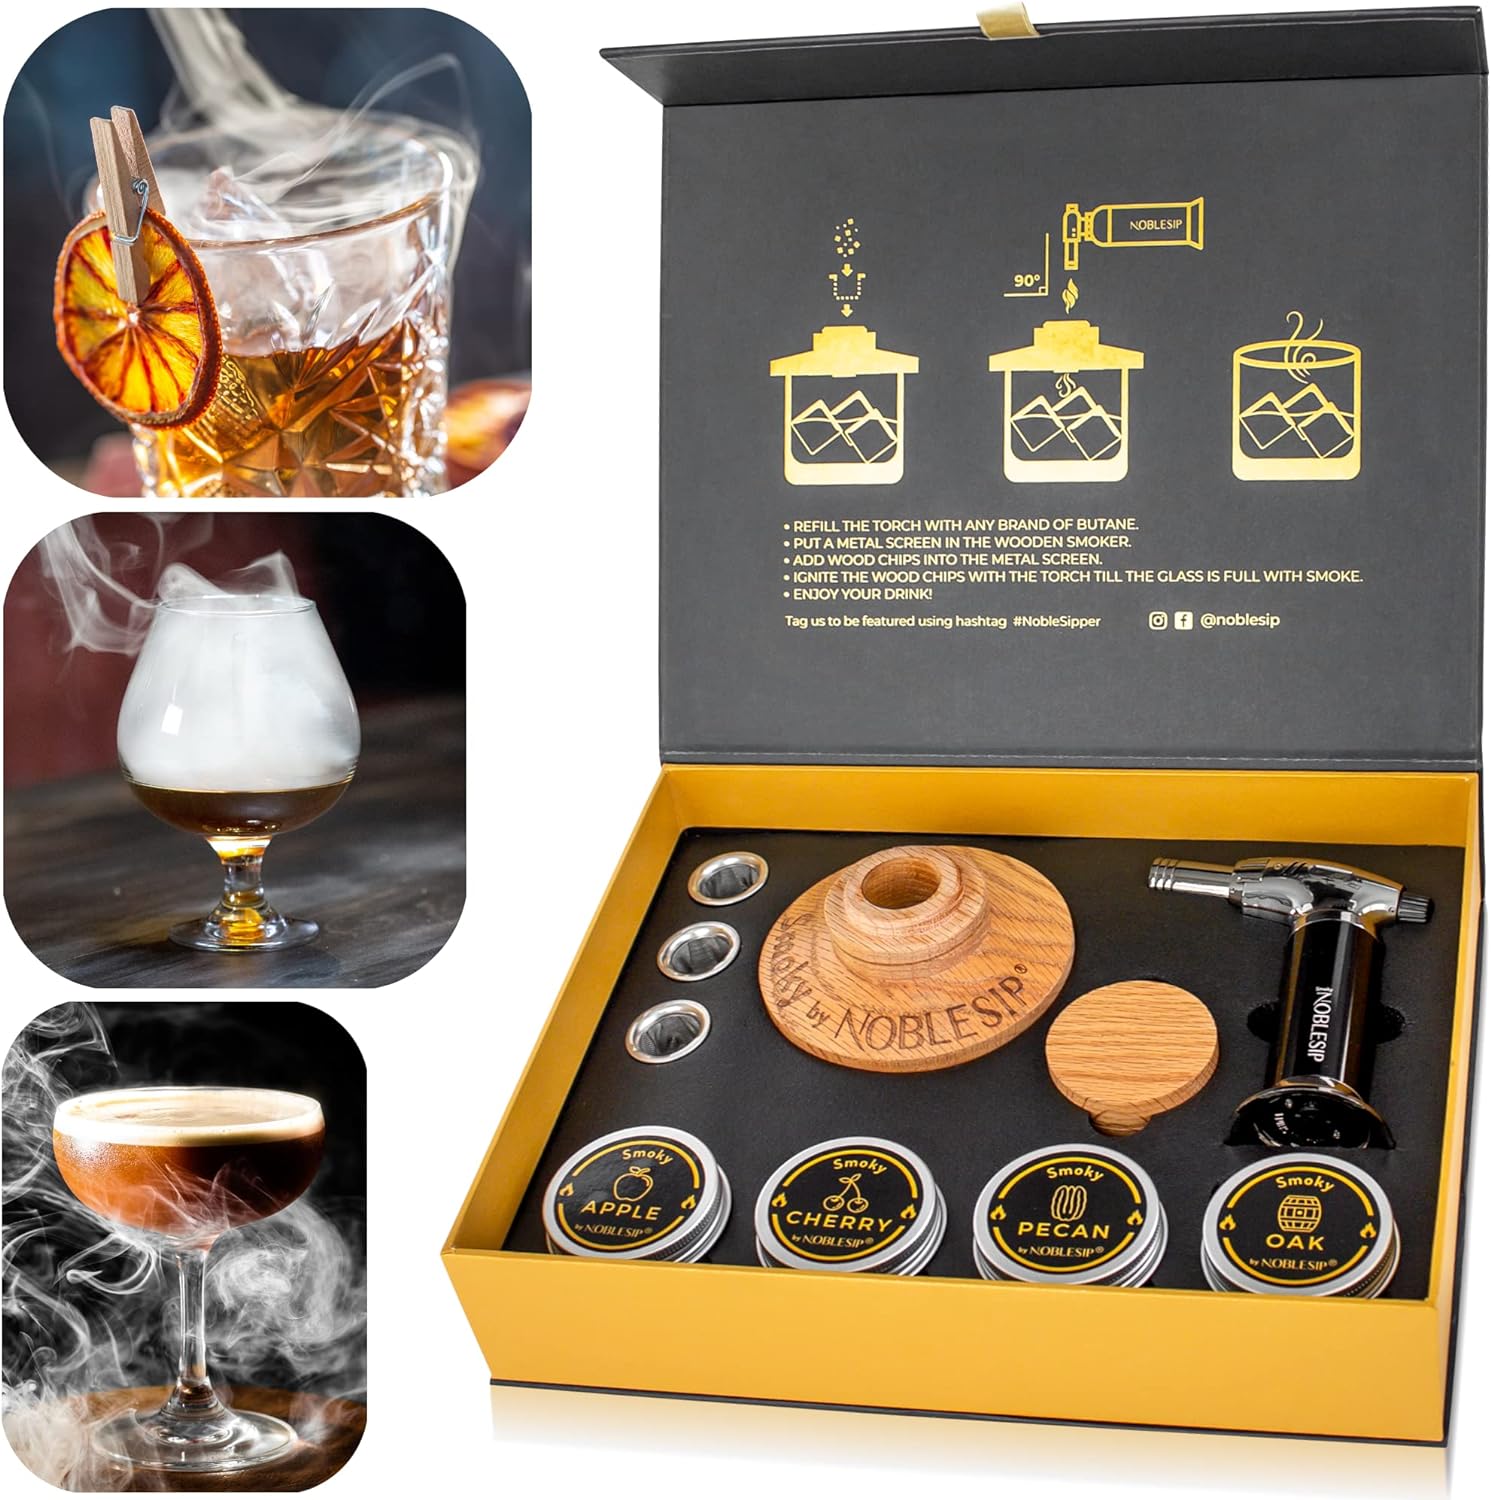 Whiskey Smoker Kit  Smoky by NOBLESIP - Complete Bar Set to Smoke your Old Fashioneds and all your Favorite Cocktails. Great gift for Whisky, Bourbon, and Scotch lovers. 100% Natural Oak